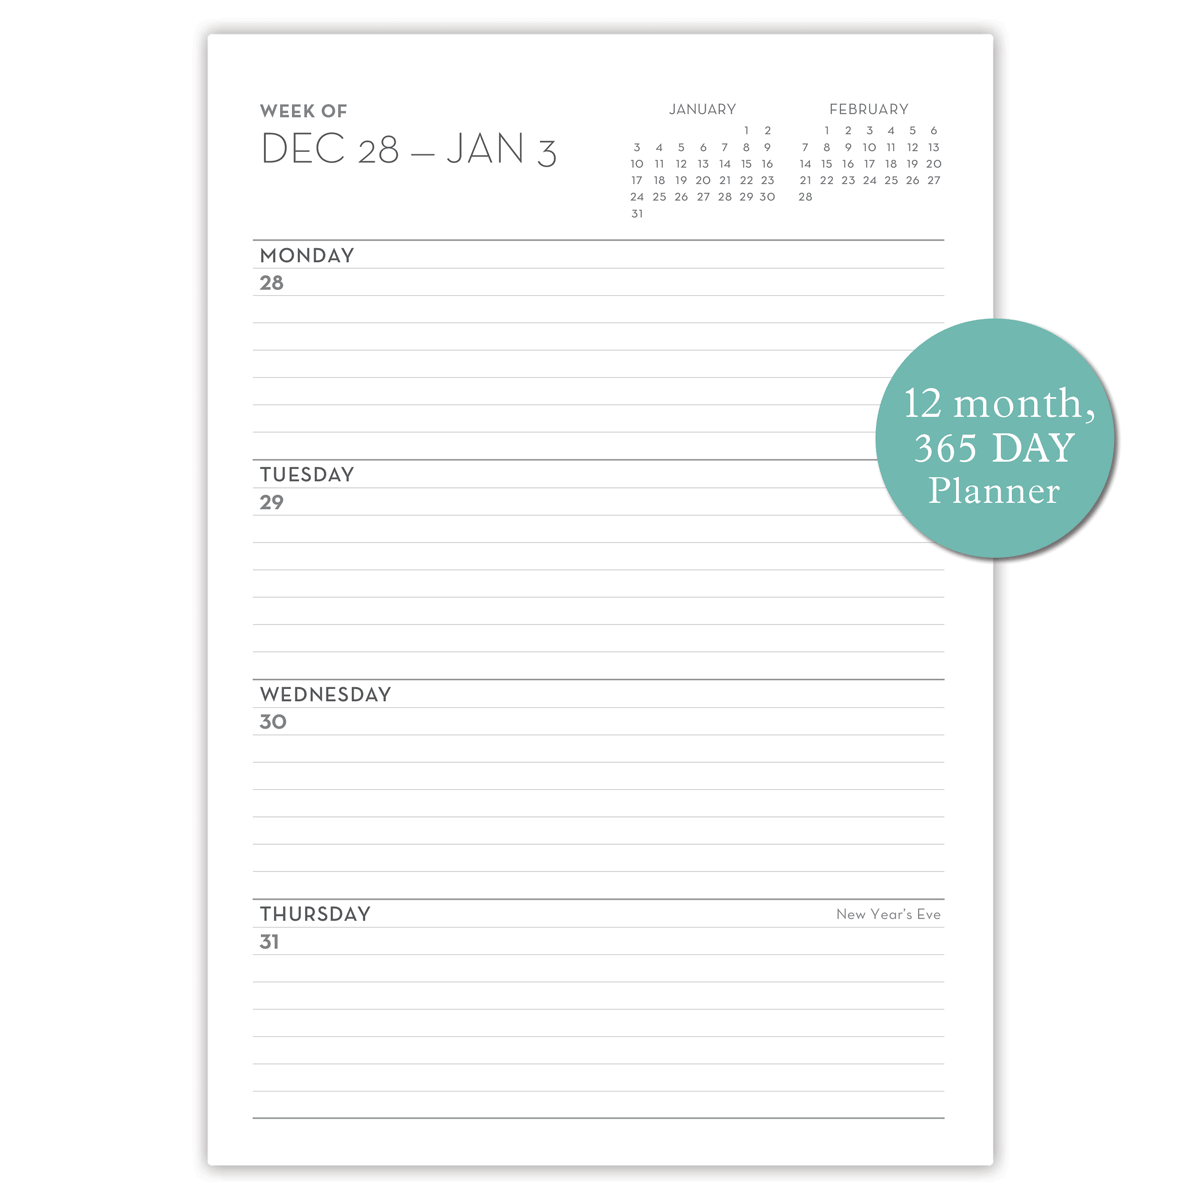 Inspire (Planner) by Theresa Mangum